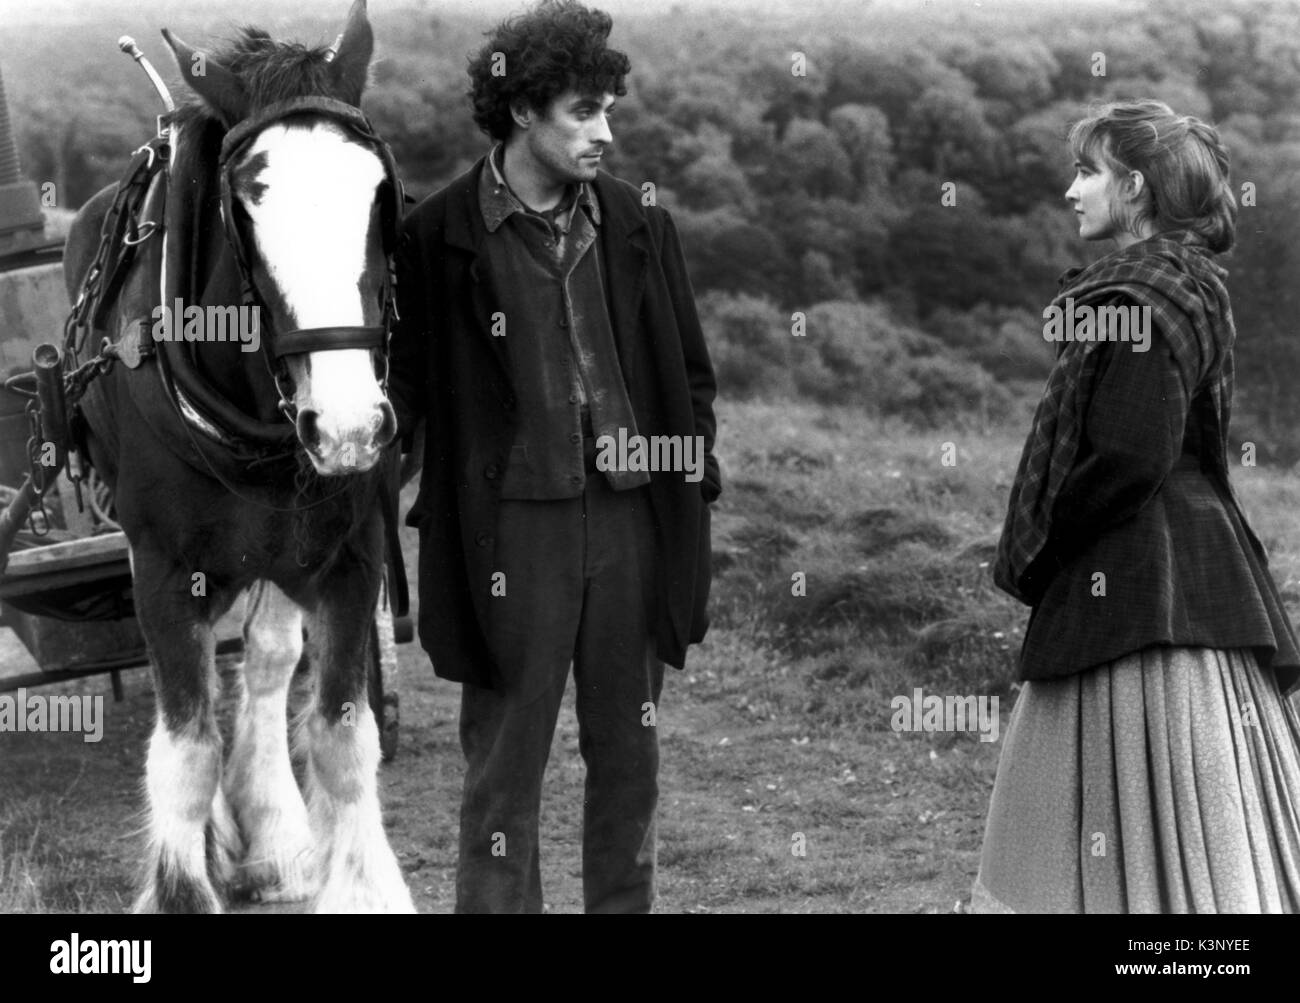 THE WOODLANDERS [BR 1997] RUFUS SEWELL as Giles Winterbourne, EMILY WOOF as Grace Malbury     Date: 1997 Stock Photo